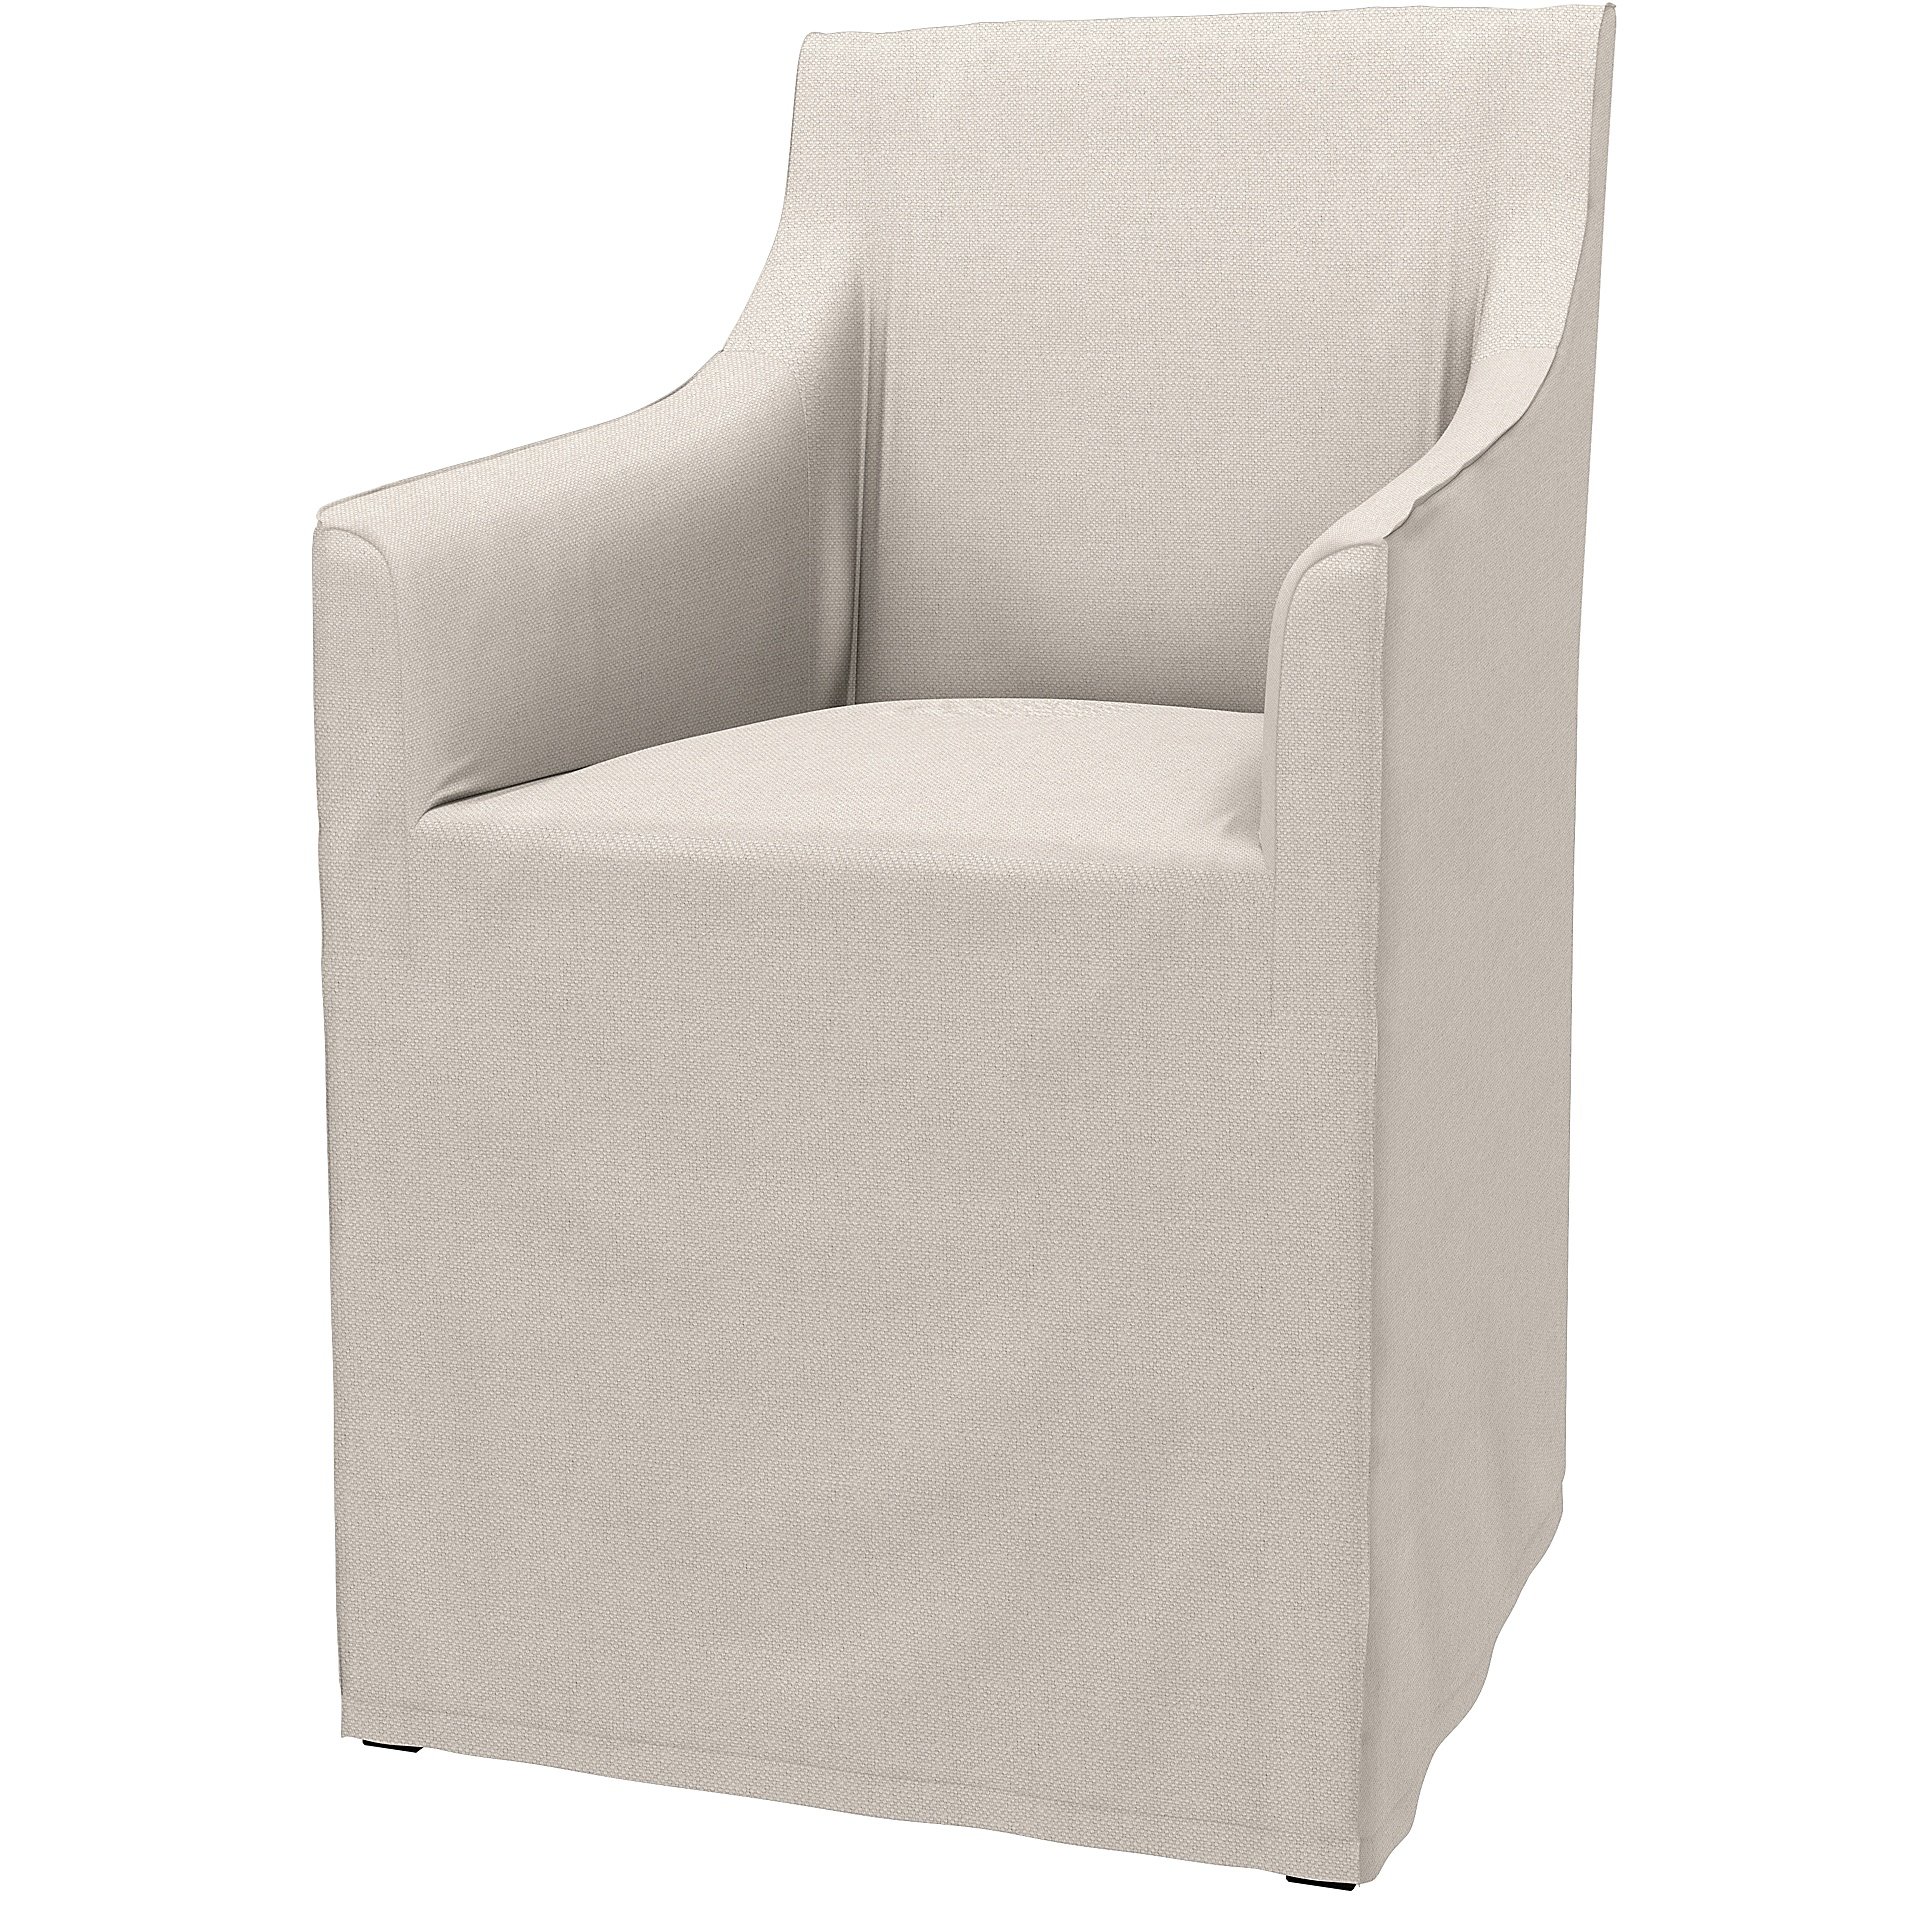 IKEA - Sakarias Chair with Armrests Cover, Chalk, Linen - Bemz